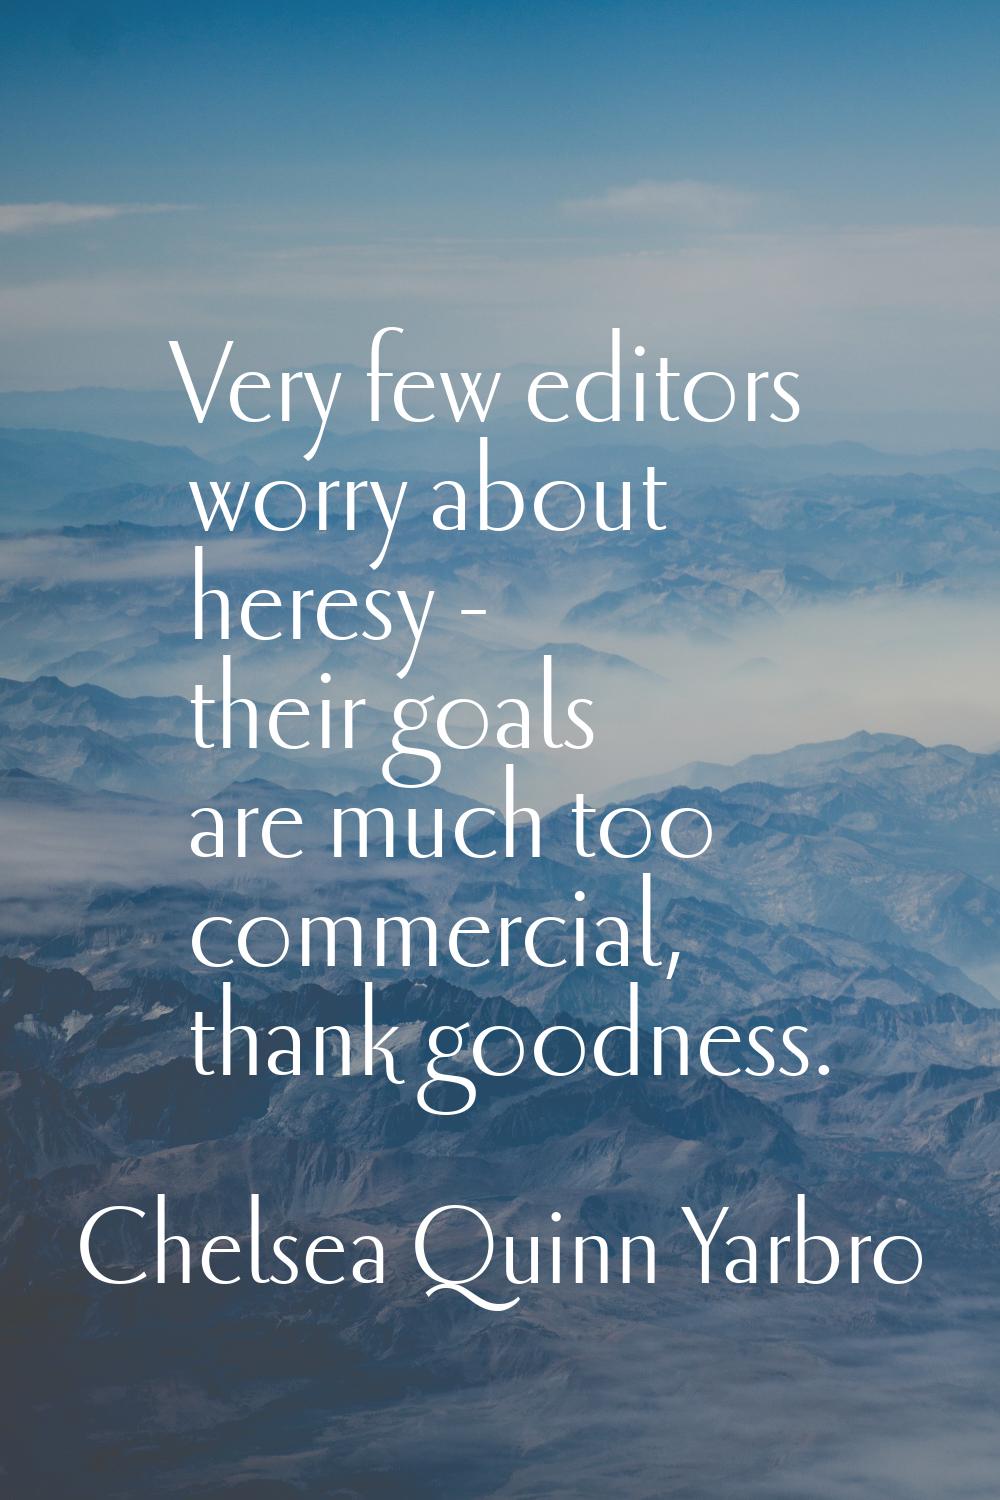 Very few editors worry about heresy - their goals are much too commercial, thank goodness.